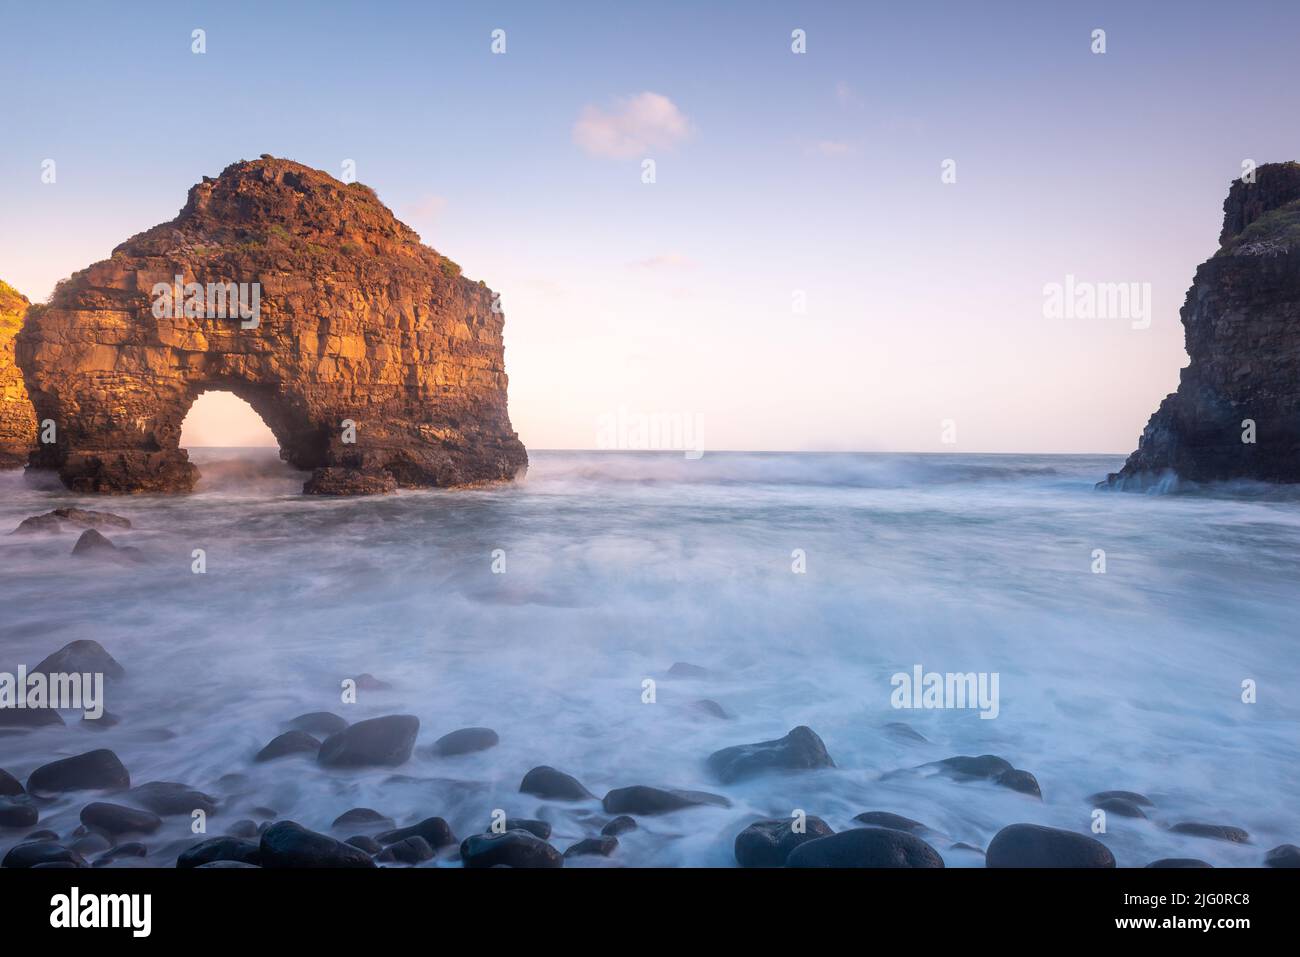 Arch of Los Roques beach, Tenerife island, Spain Stock Photo